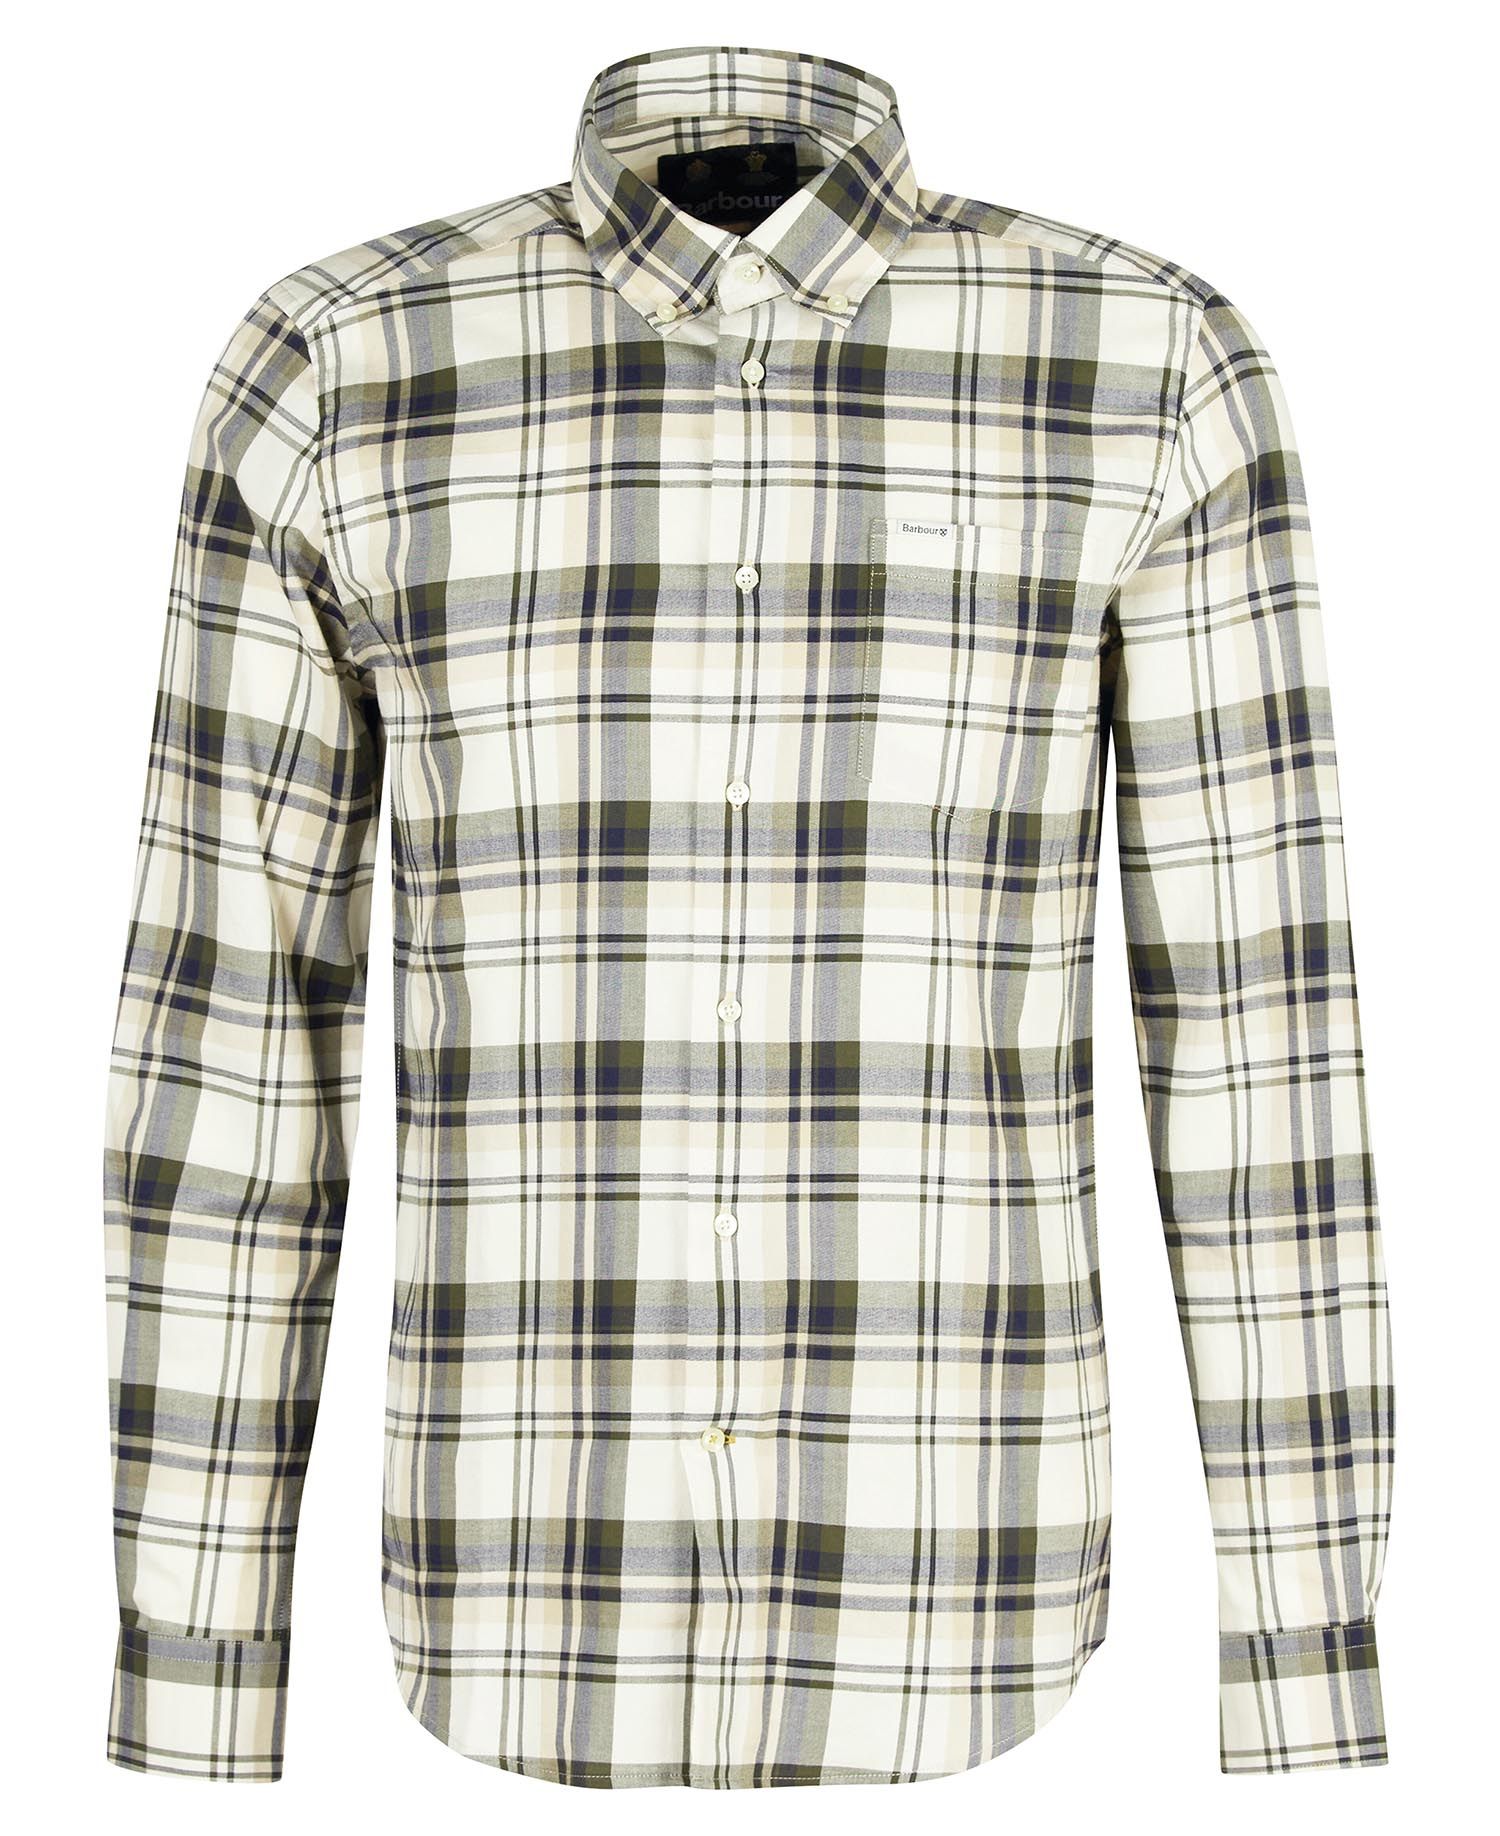 Barbour Falstone Tailored Checked Shirt